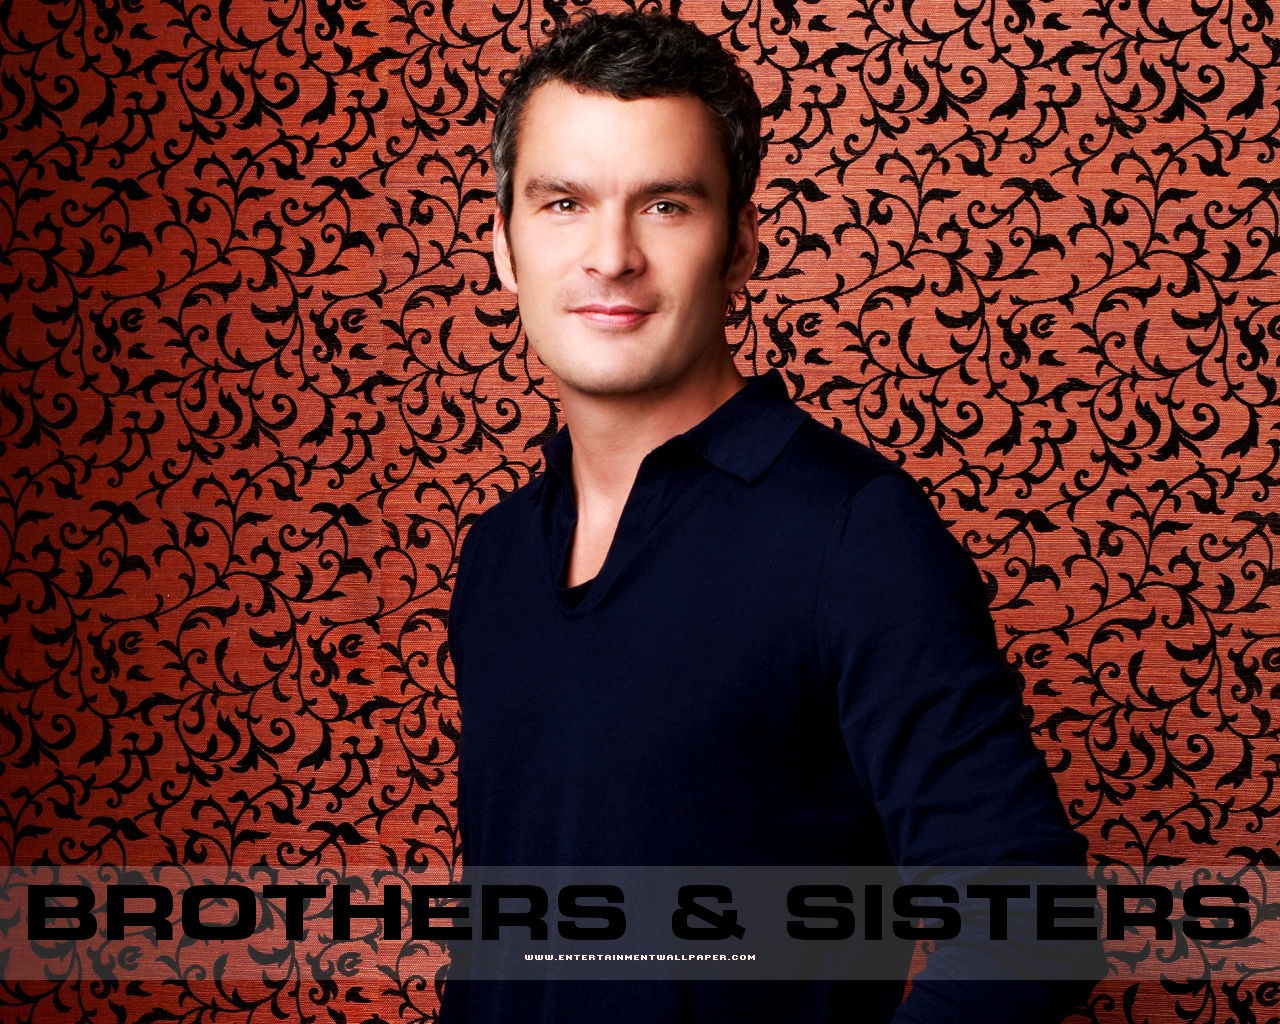 Brothers & Sisters wallpaper #17 - 1280x1024